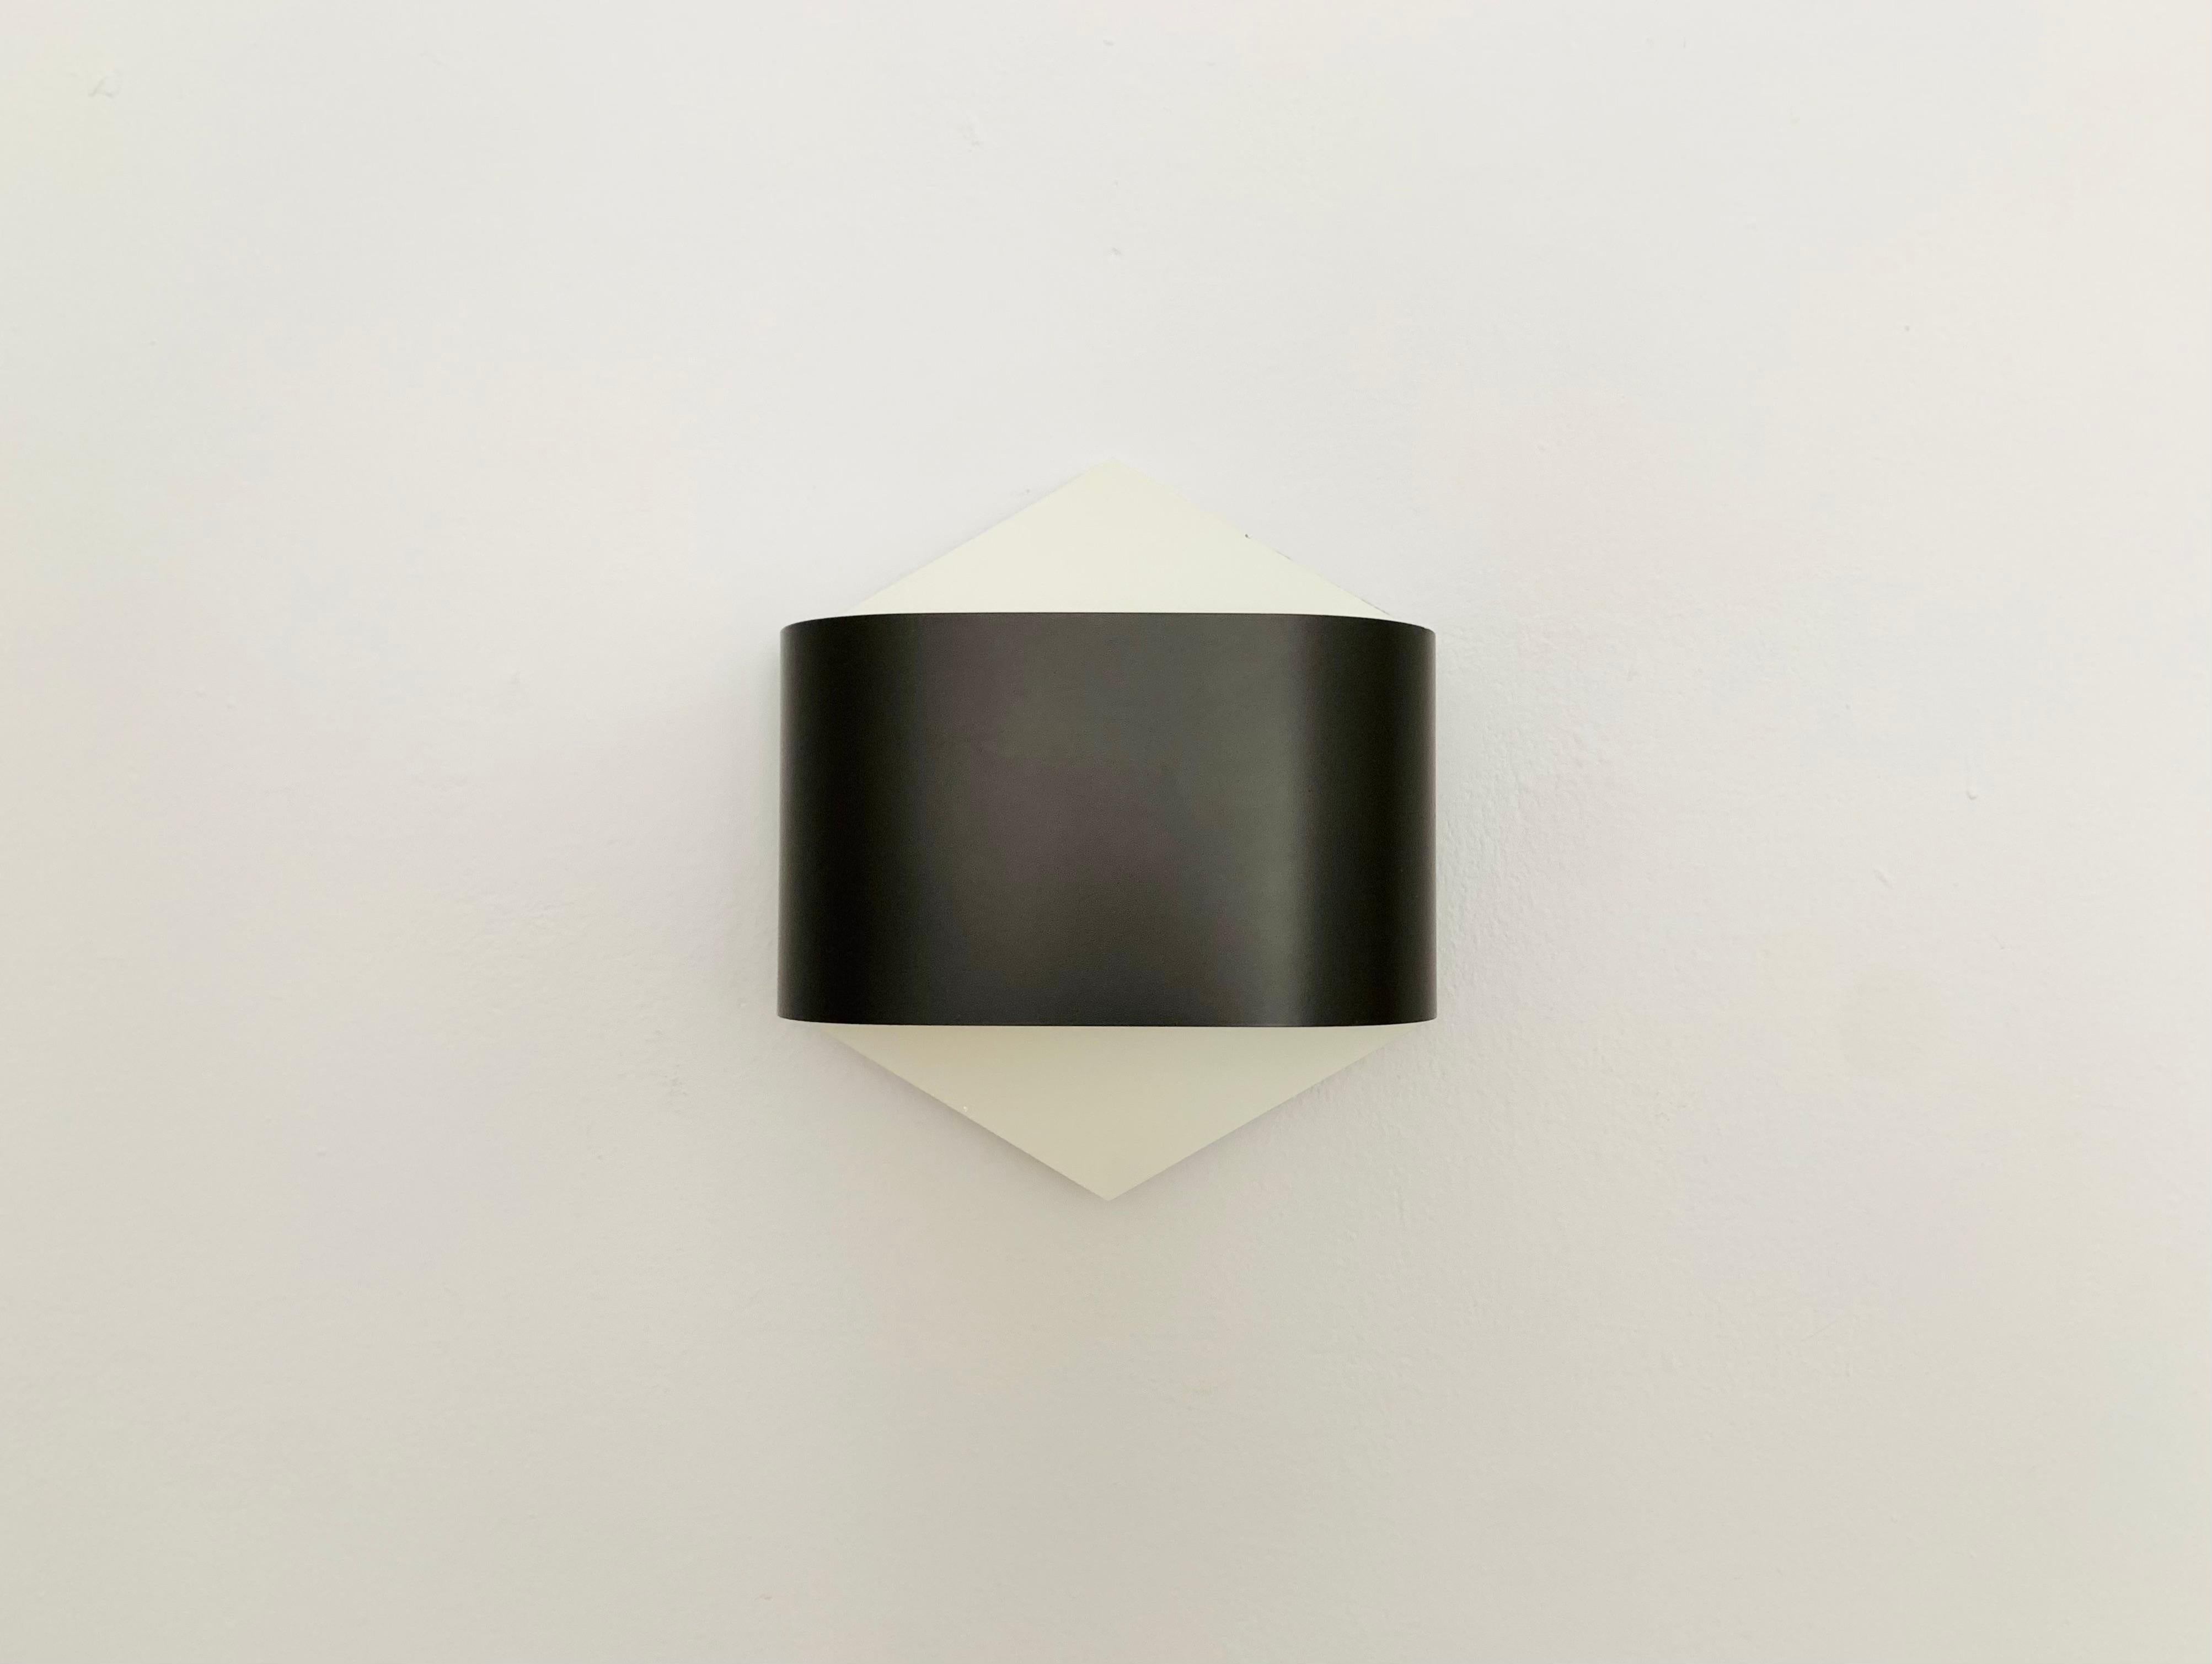 Fantastic wall lamp from the 1970s.
The Staff brand is known for its high-quality workmanship and design.
A wonderful play of light is created on the wall.

Design: R. Krüger and D. Witte
Manufacturer: Staff

The color outside is dark